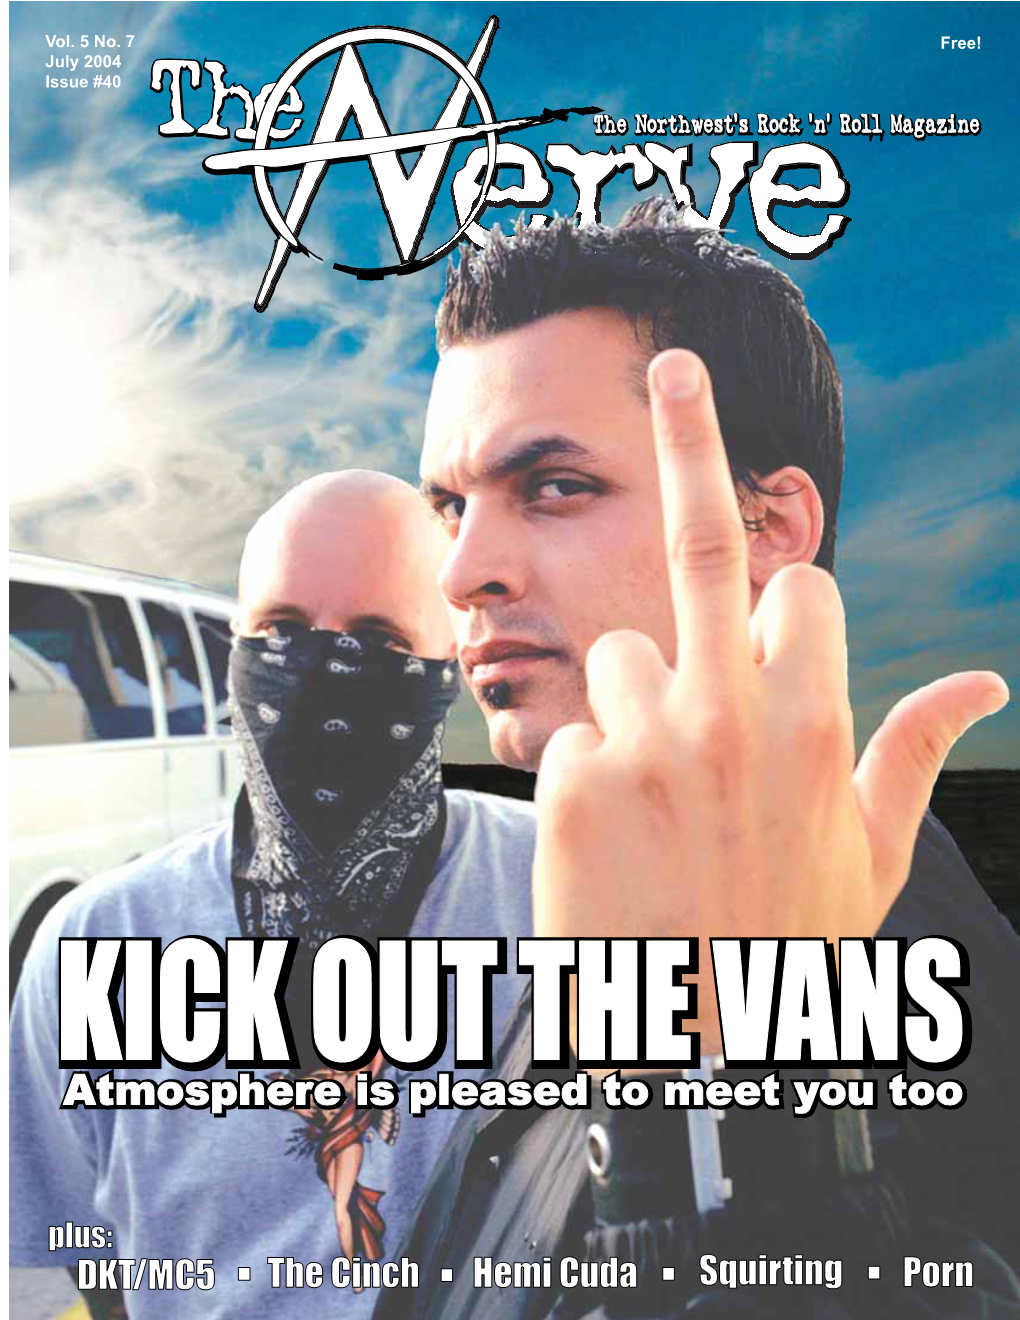 Off the Record 20 Advertise@Thenervemagazine.Com Gene Simmons, the Operators 780, Morrissey, the 3-Tards, Cover Photo: Dan Monick the Briefs, the Wildhearts, W.A.S.P